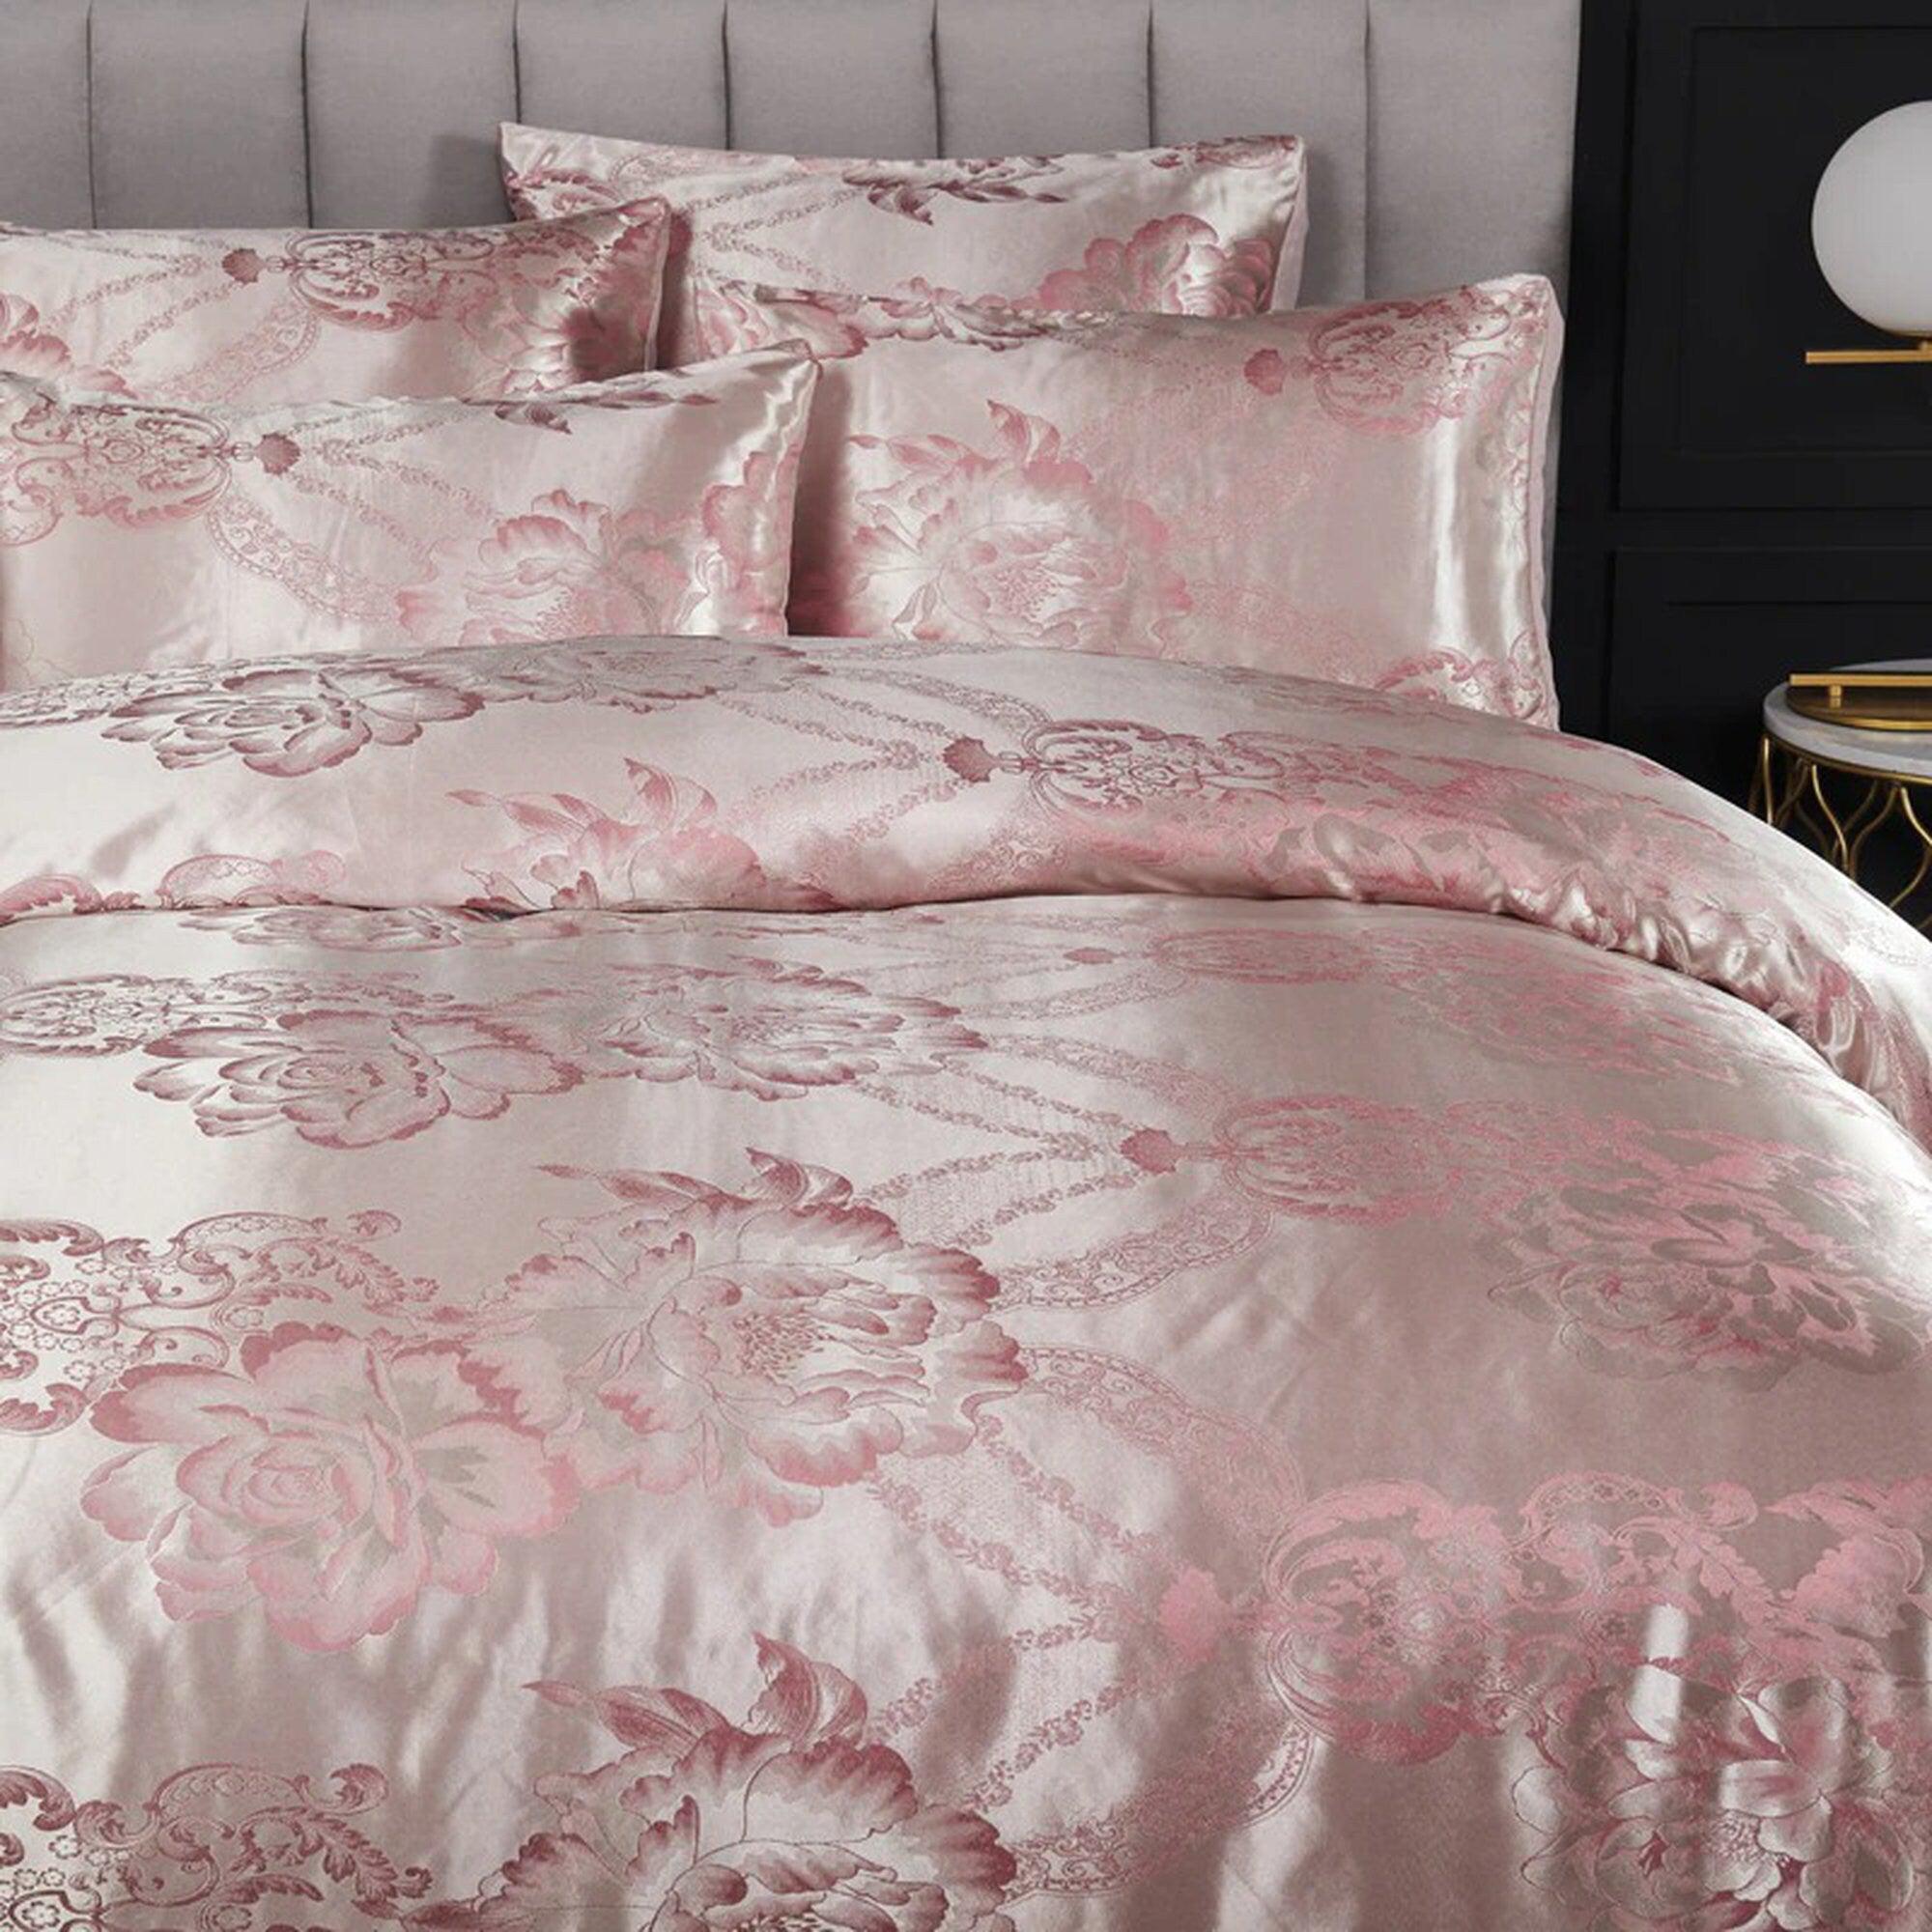 daintyduvet Luxury Baby Pink Bedding made with Silky Jacquard Fabric, Damask Duvet Cover Set, Designer Bedding, Aesthetic Duvet King Queen Full Twin